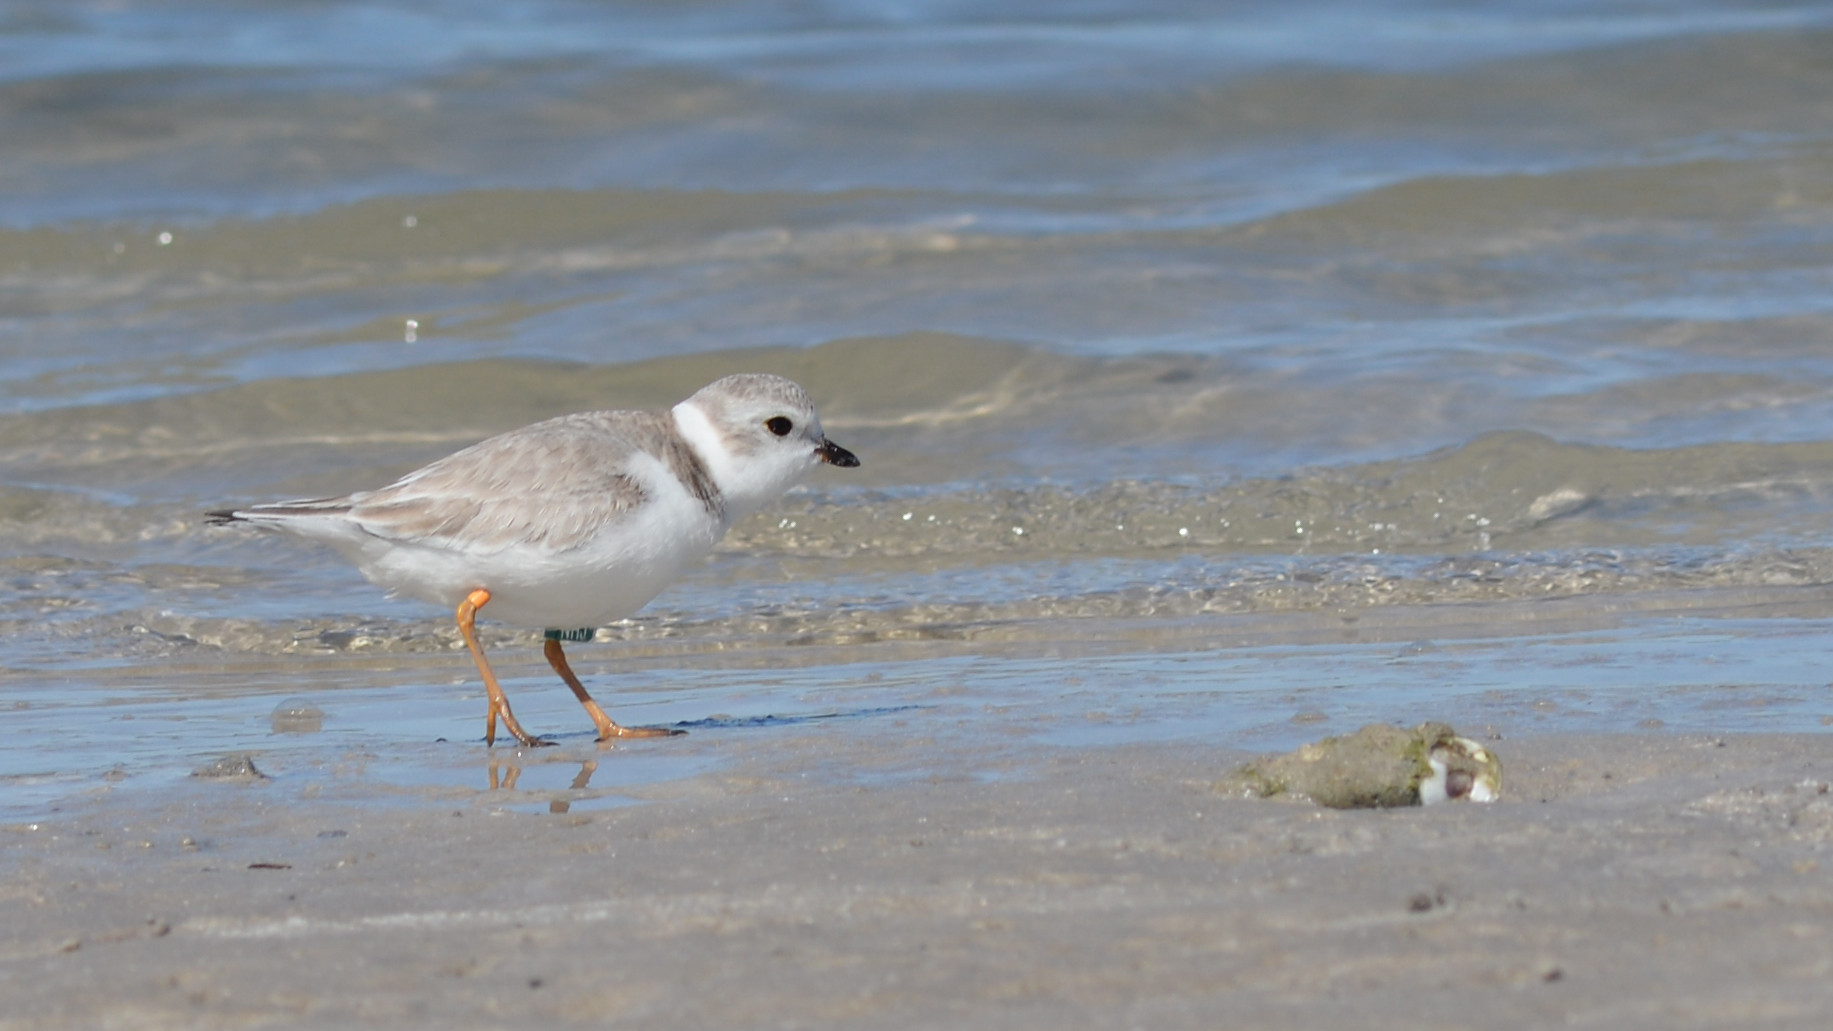 Charadrius melodus at Honeymoon Island in front of the water